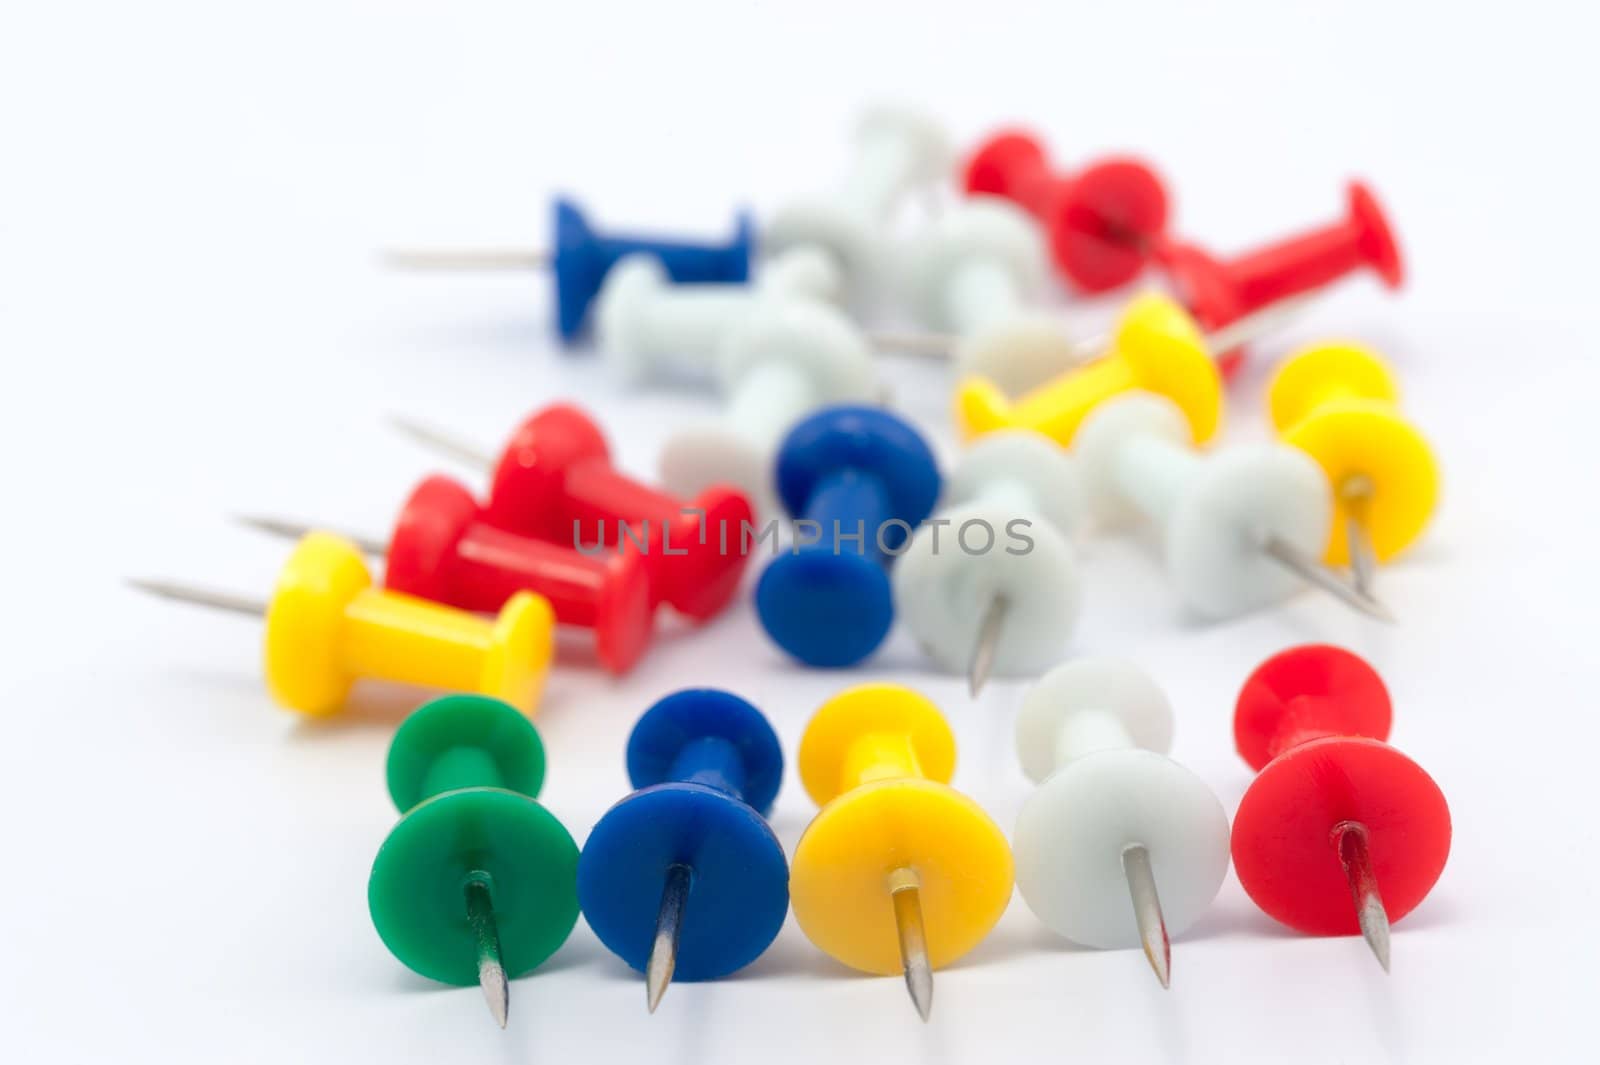 Colorful pushpins by raywoo